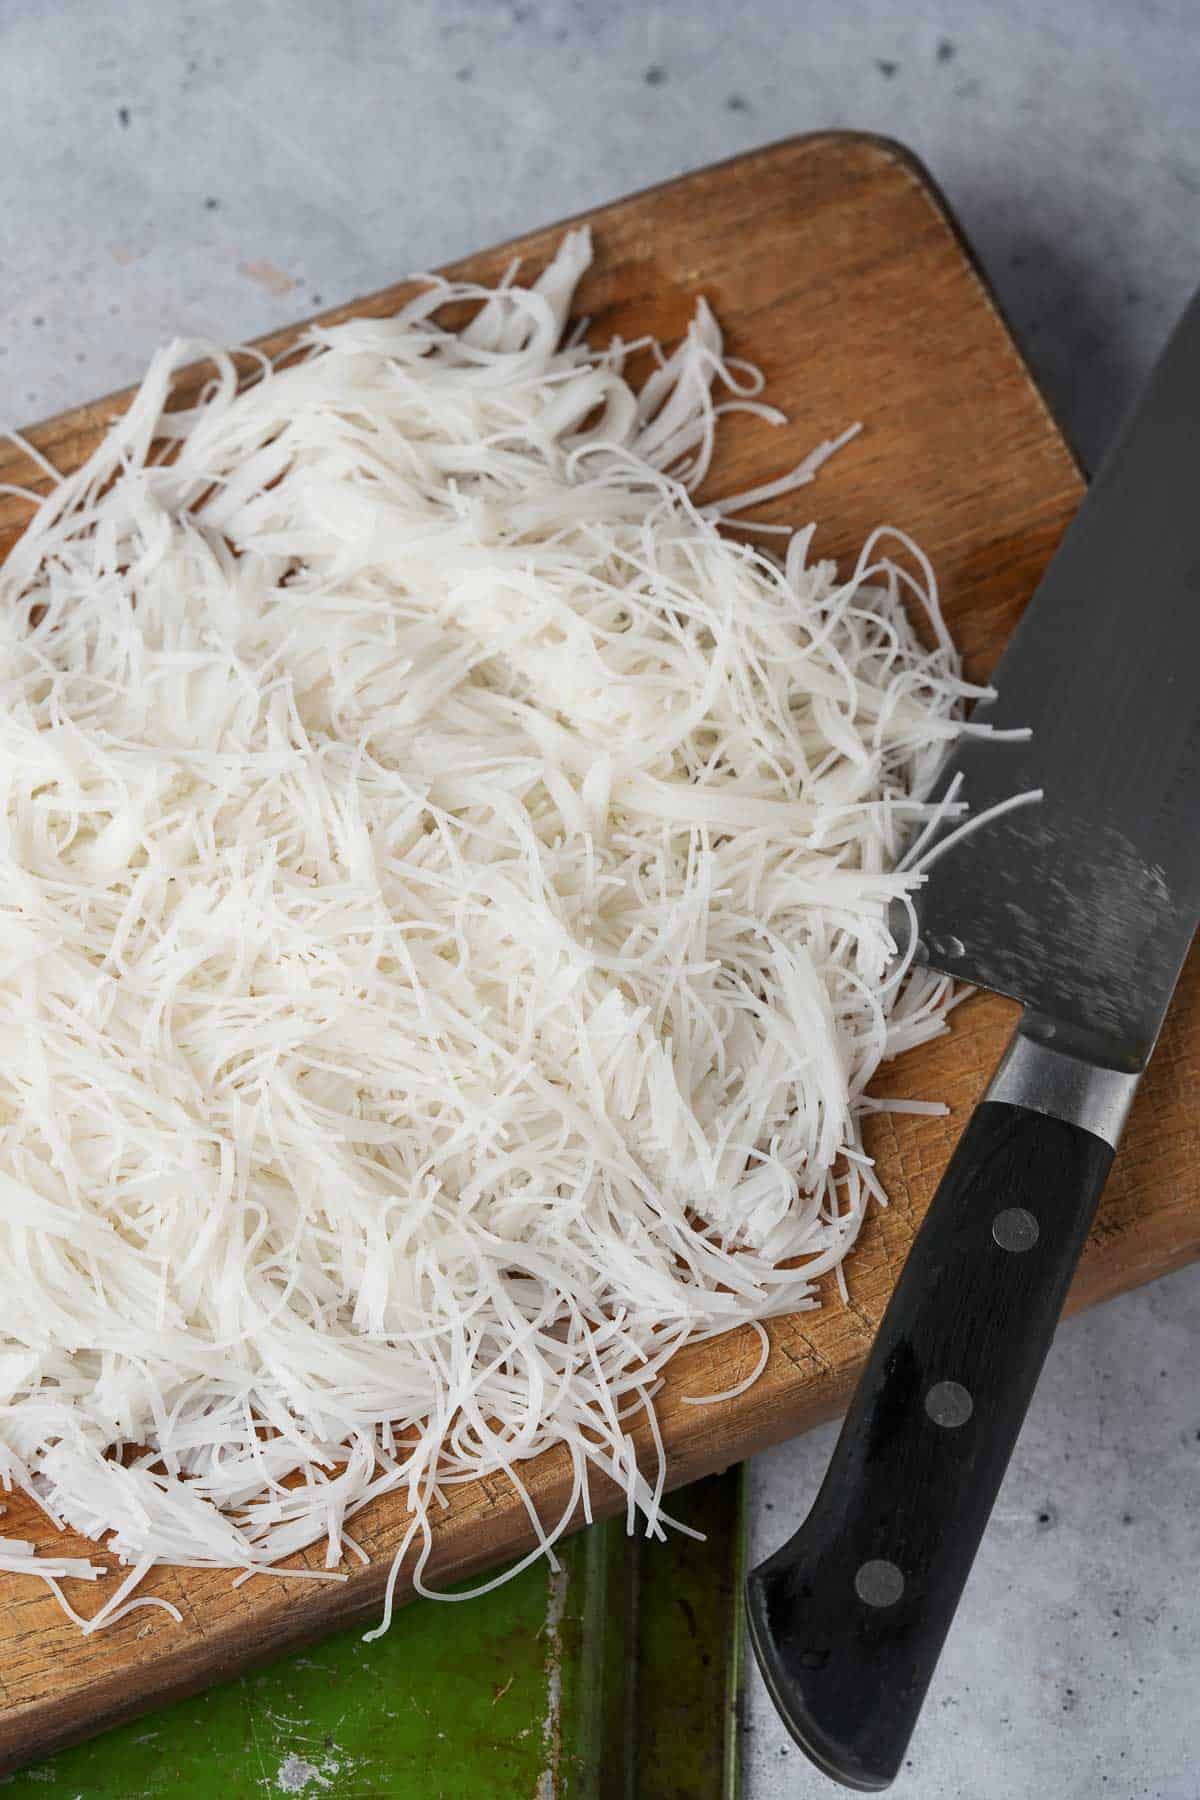 Chopped noodles on a cutting board with a knife.